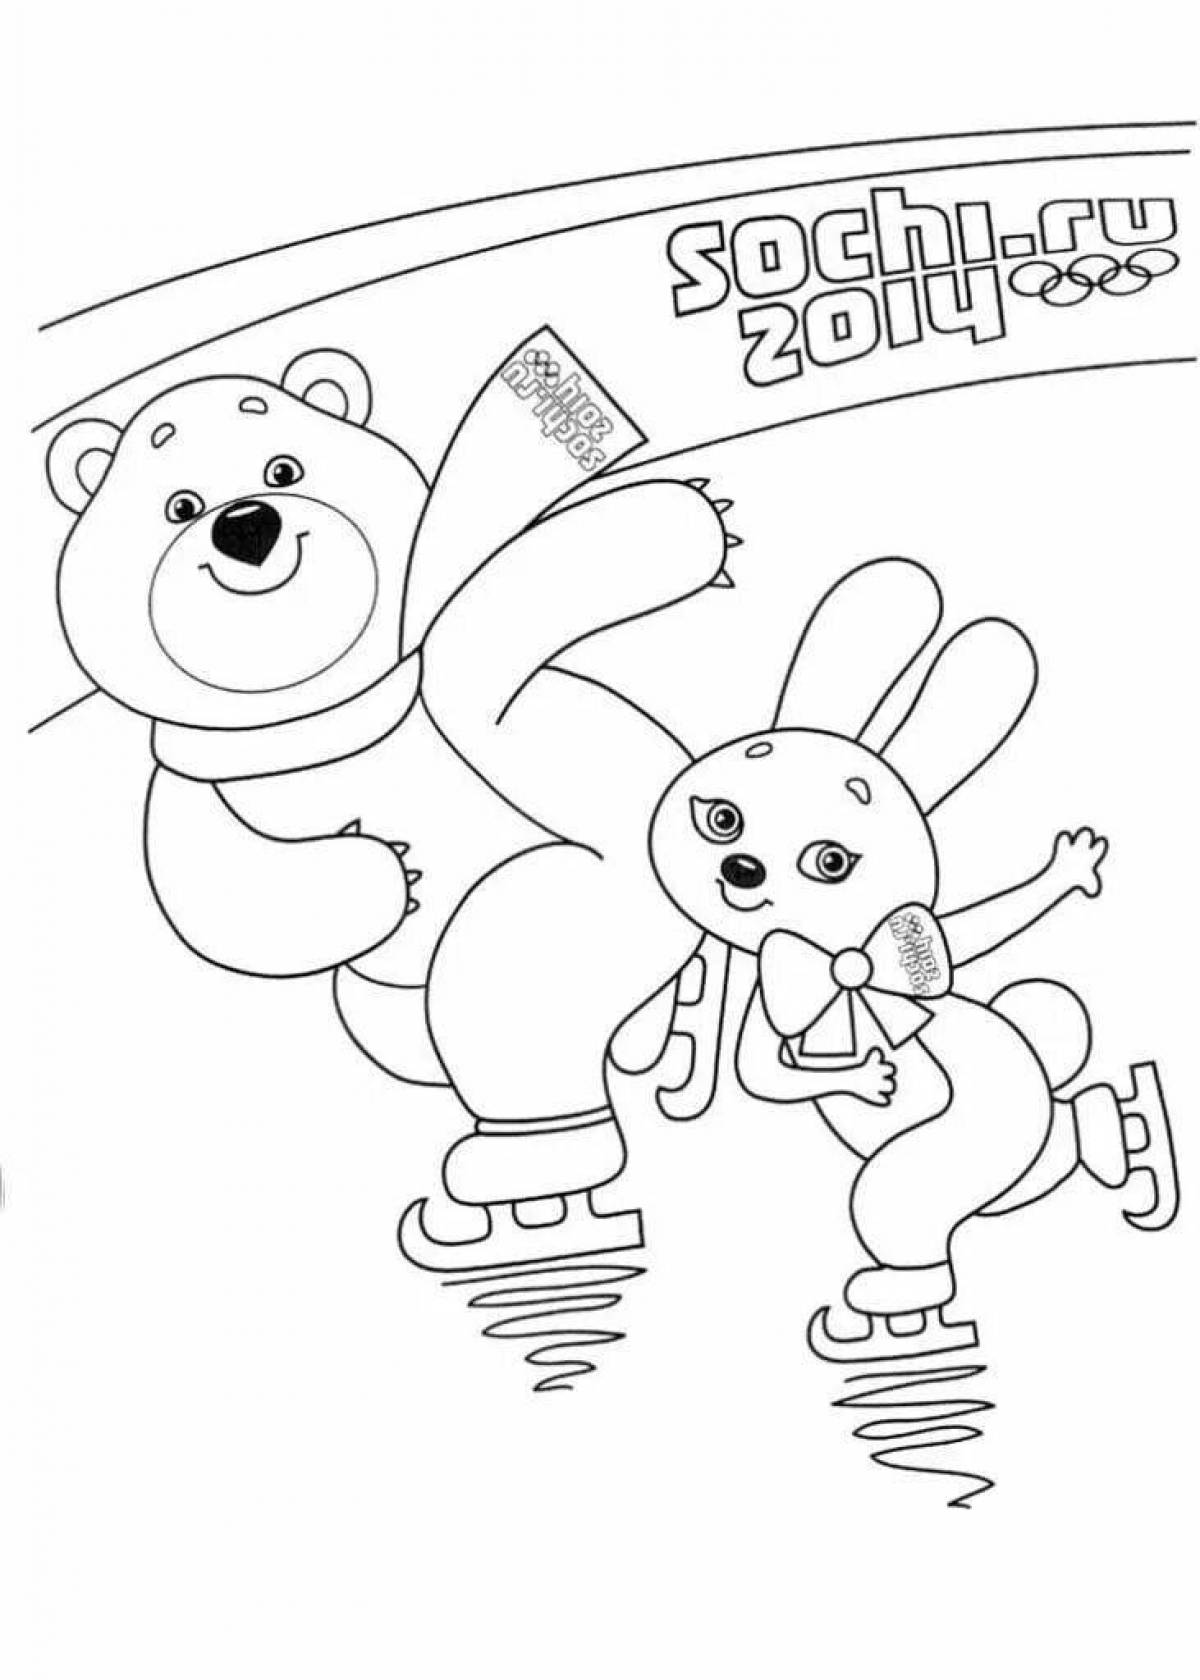 Coloring page bright olympic bear